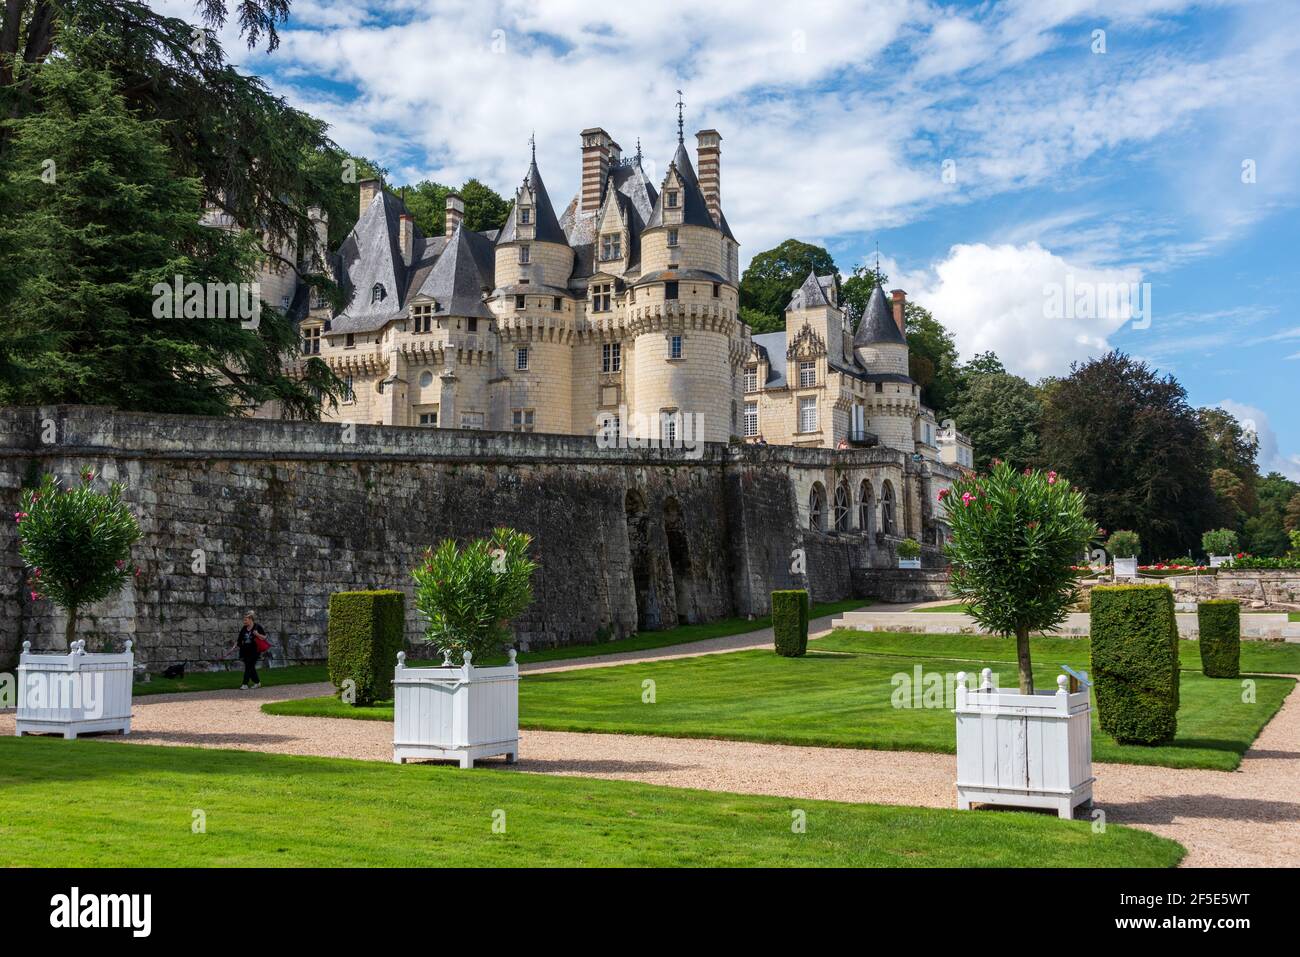 The fairy tale castle at Rigny Usse in the Loire valley France Stock Photo